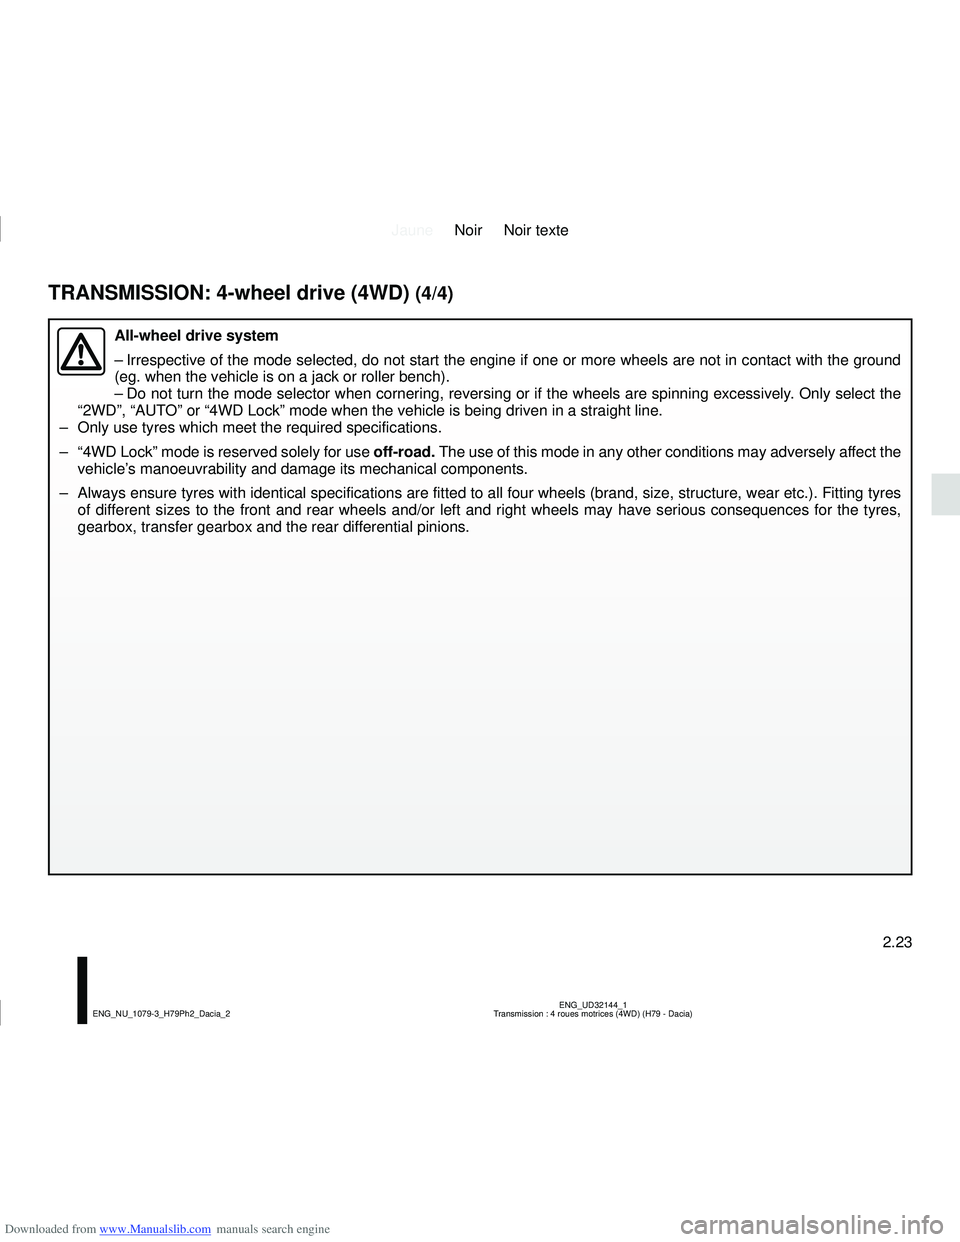 DACIA DUSTER 2019  Owners Manual Downloaded from www.Manualslib.com manuals search engine JauneNoir Noir texte
2.23
ENG_UD32144_1
Transmission : 4 roues motrices (4WD) (H79 - Dacia)
ENG_NU_1079-3_H79Ph2_Dacia_2
TRANSMISSION: 4-wheel 